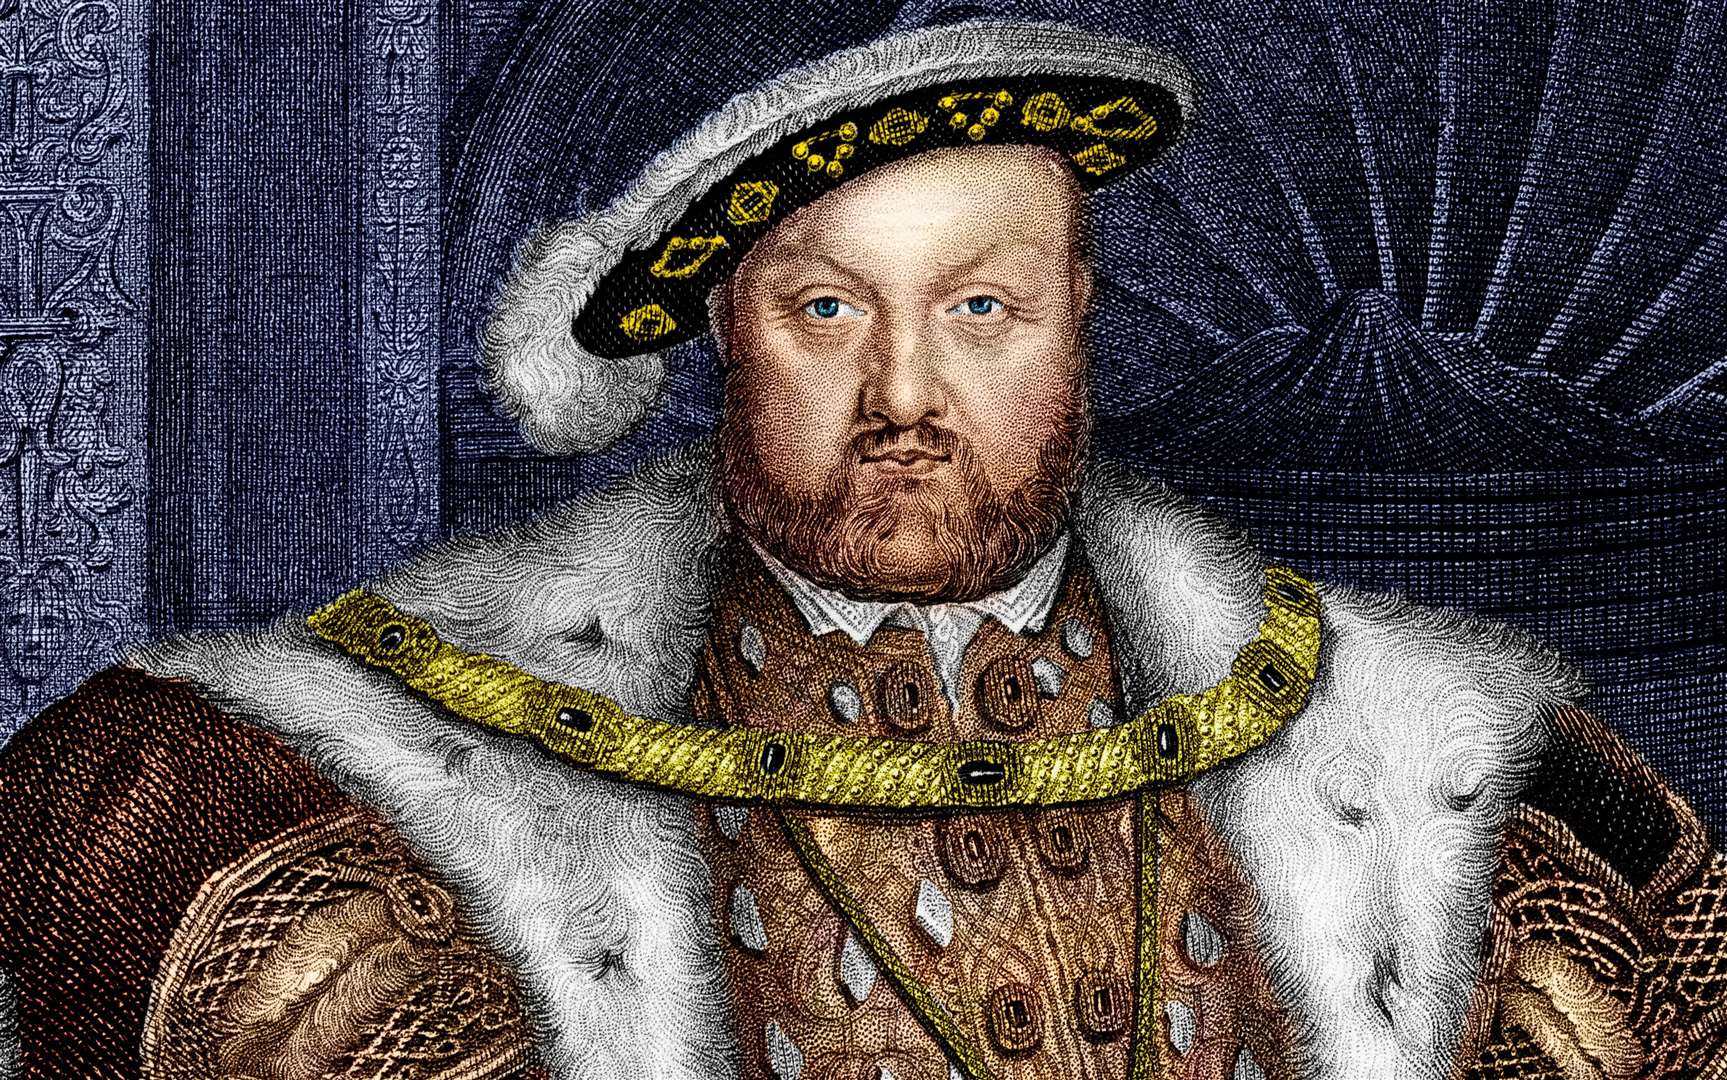 Henry VIII’s decision to split from Rome and establish the Church of England fuelled the Puritans’ dissatisfaction with life in England